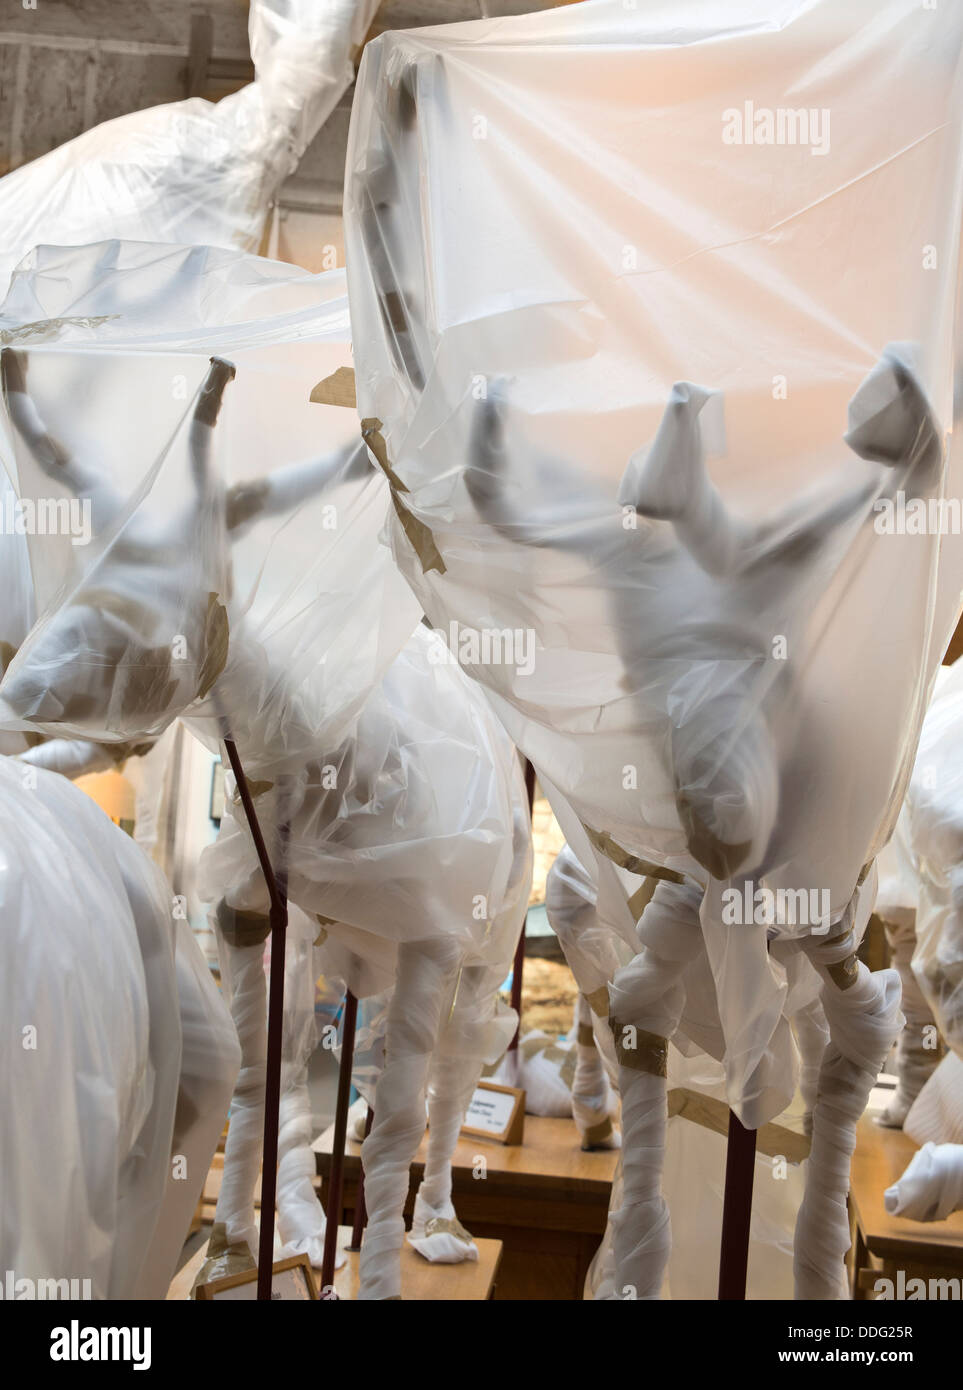 An eerie sight of wrapped, shrouded exhibits during renovation of the Pitt Rivers Natural History Museum, Oxford 1 Stock Photo